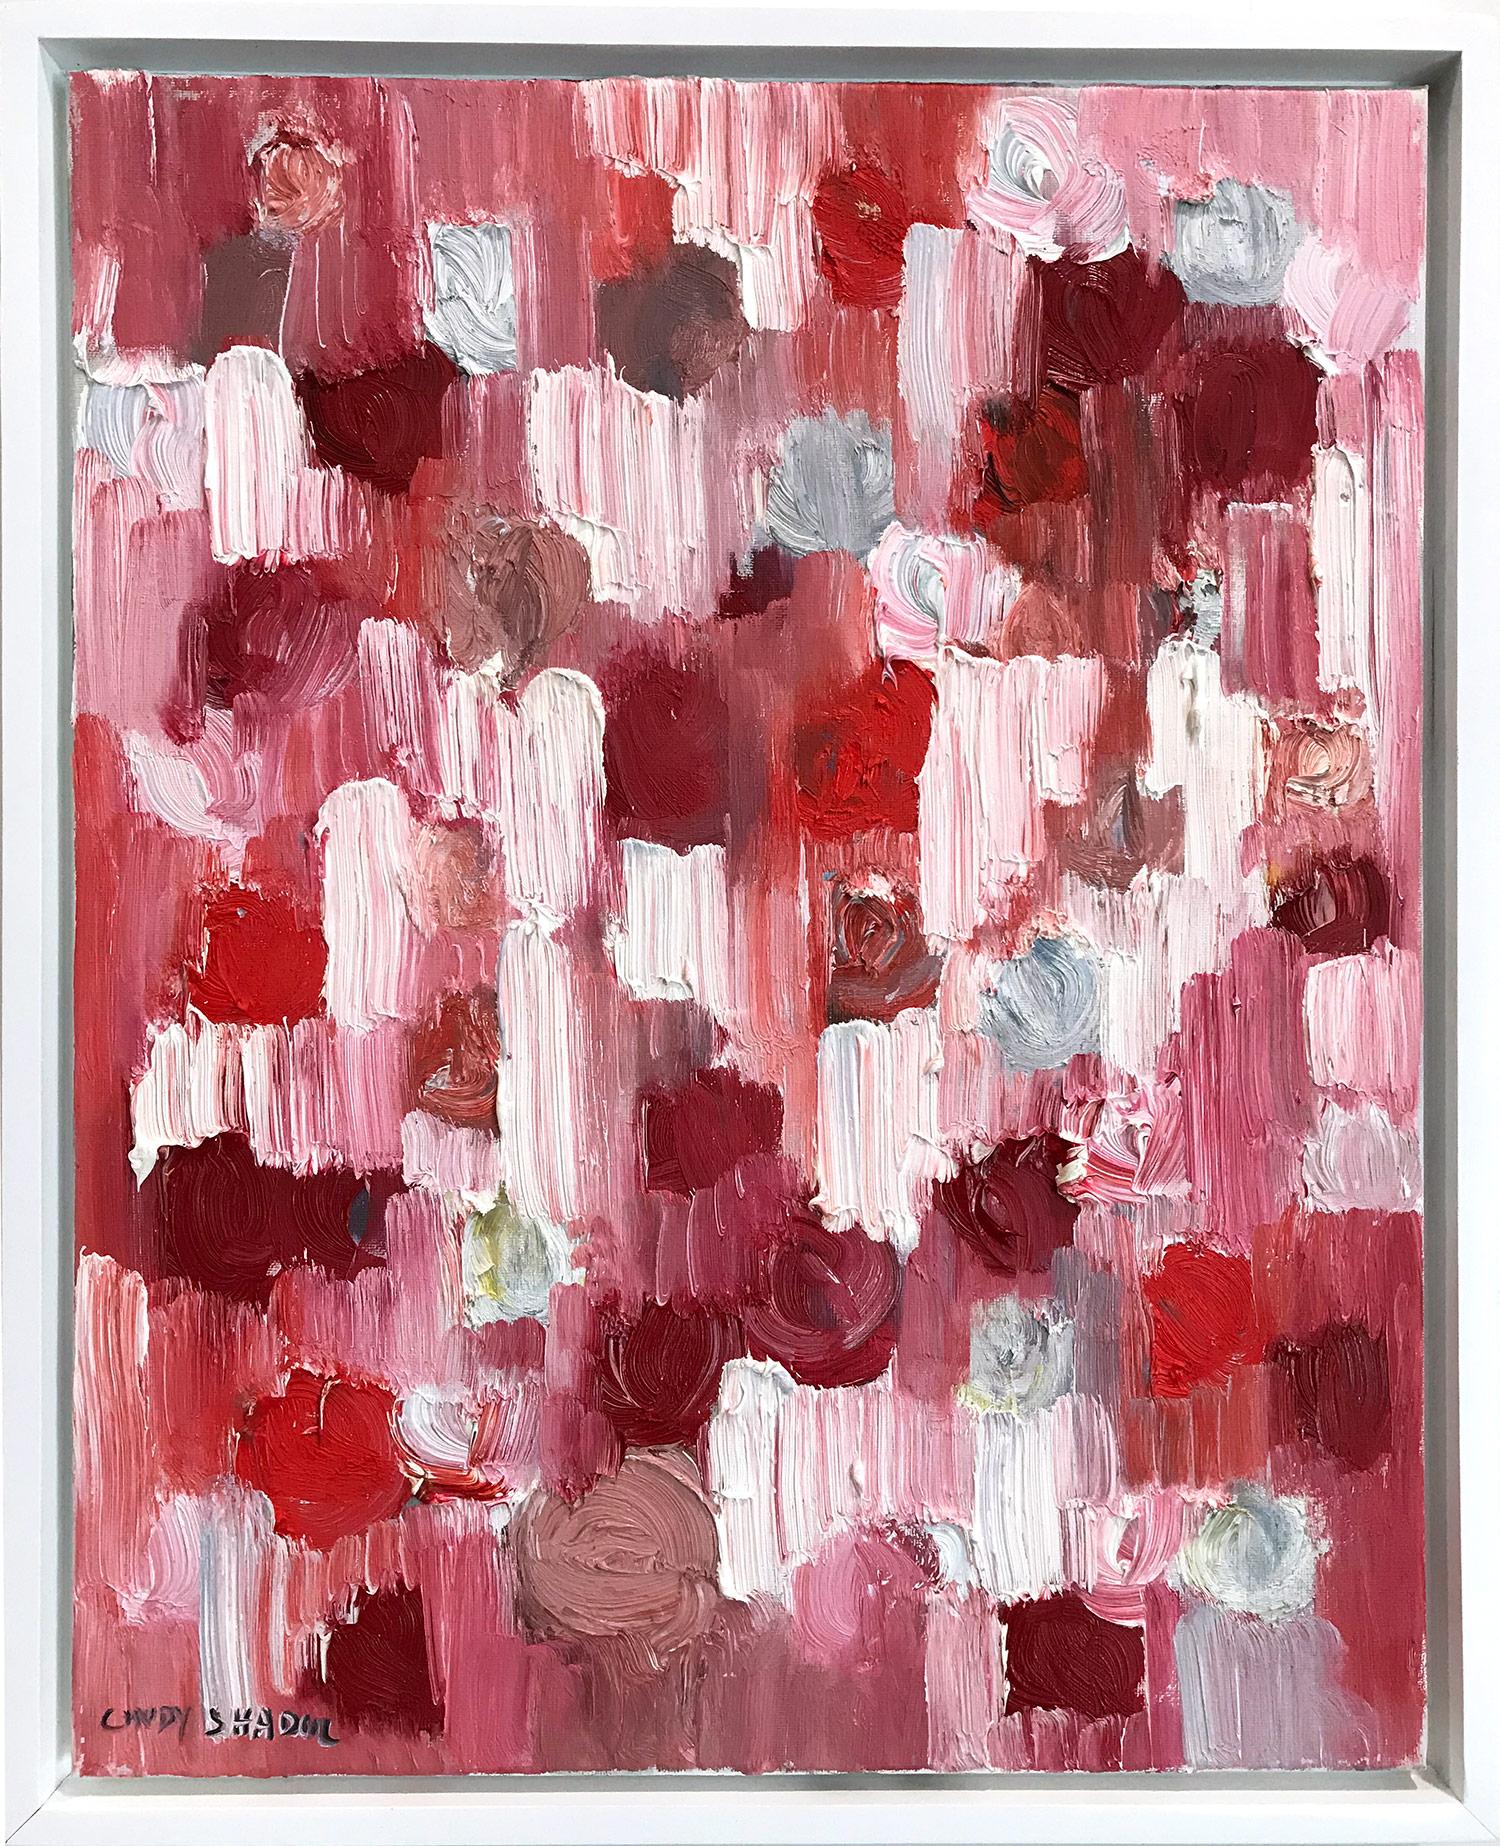 Cindy Shaoul Abstract Painting - Dripping Dots, All in Love, Deep Red